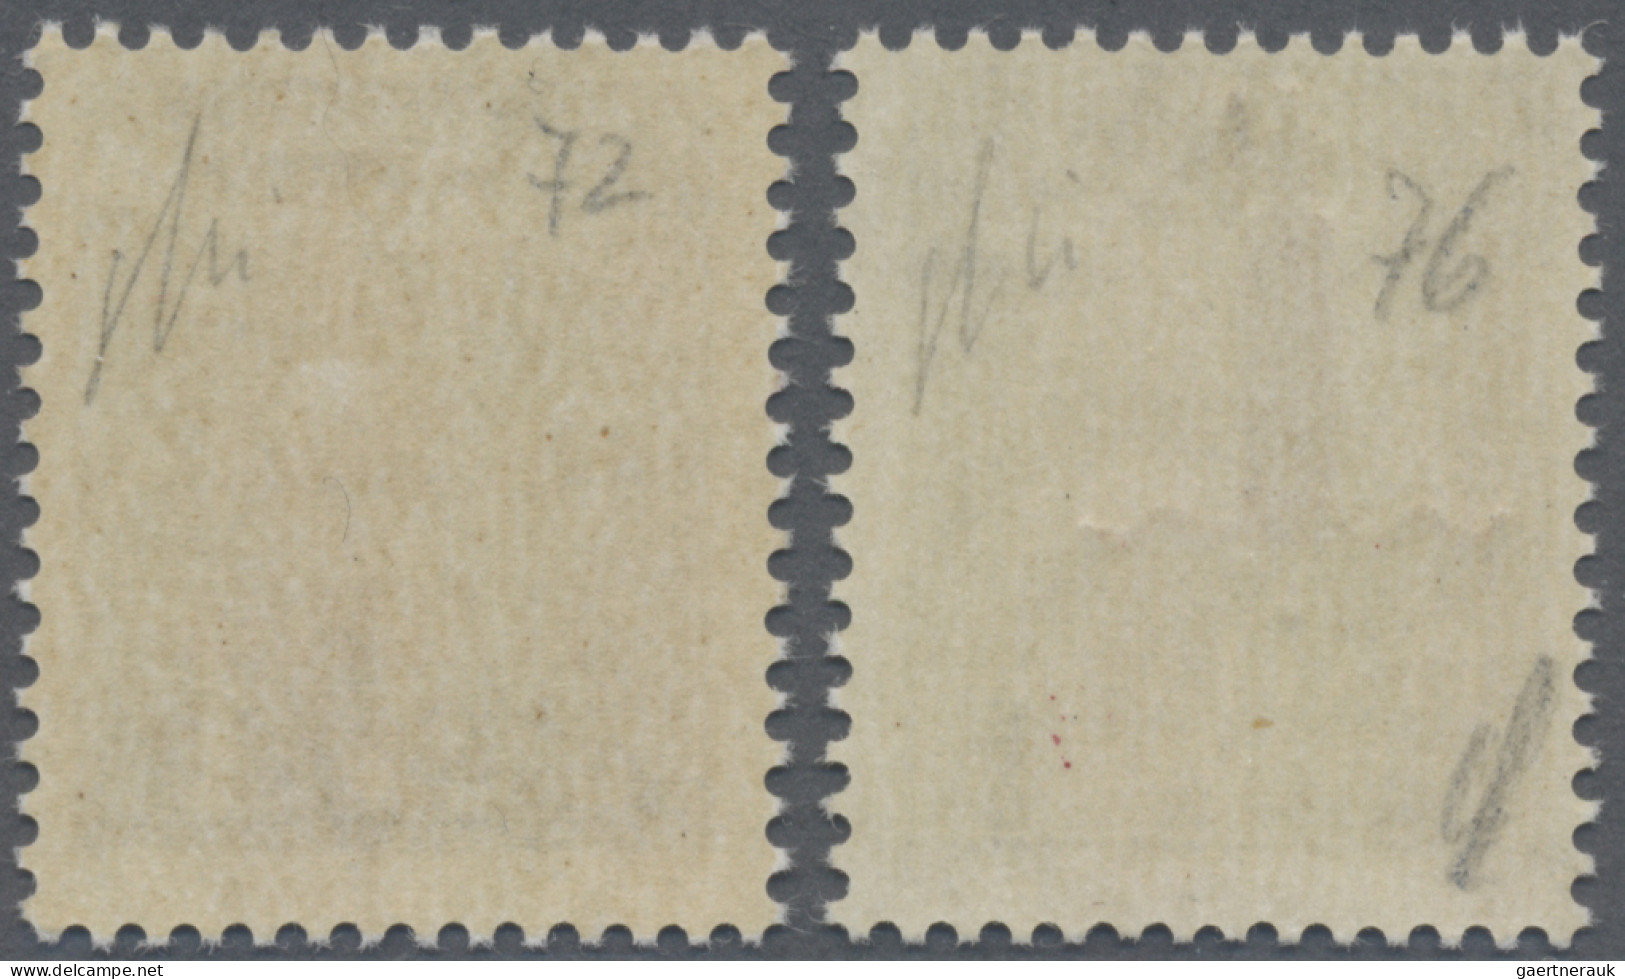 Italy: 1944. UNISSUED OVERPRINTS. Proofs Done In Verona. R.S.I. Overprint On Air - Nuevos